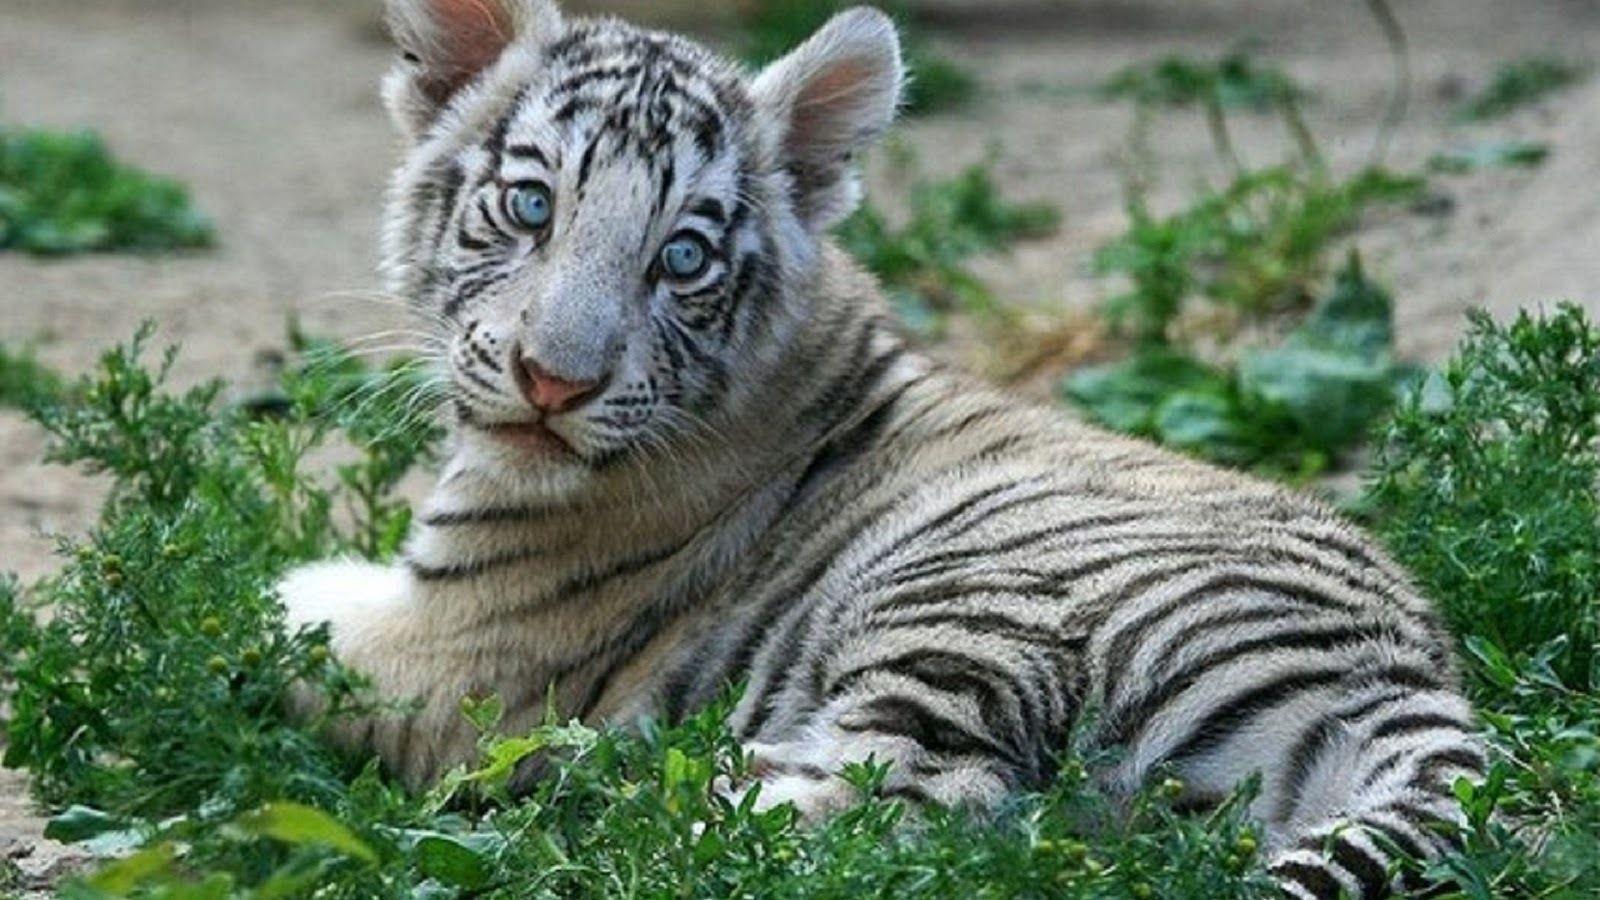 Tiger House Cat Information about tiger ger cat is a. HD Wallpaper